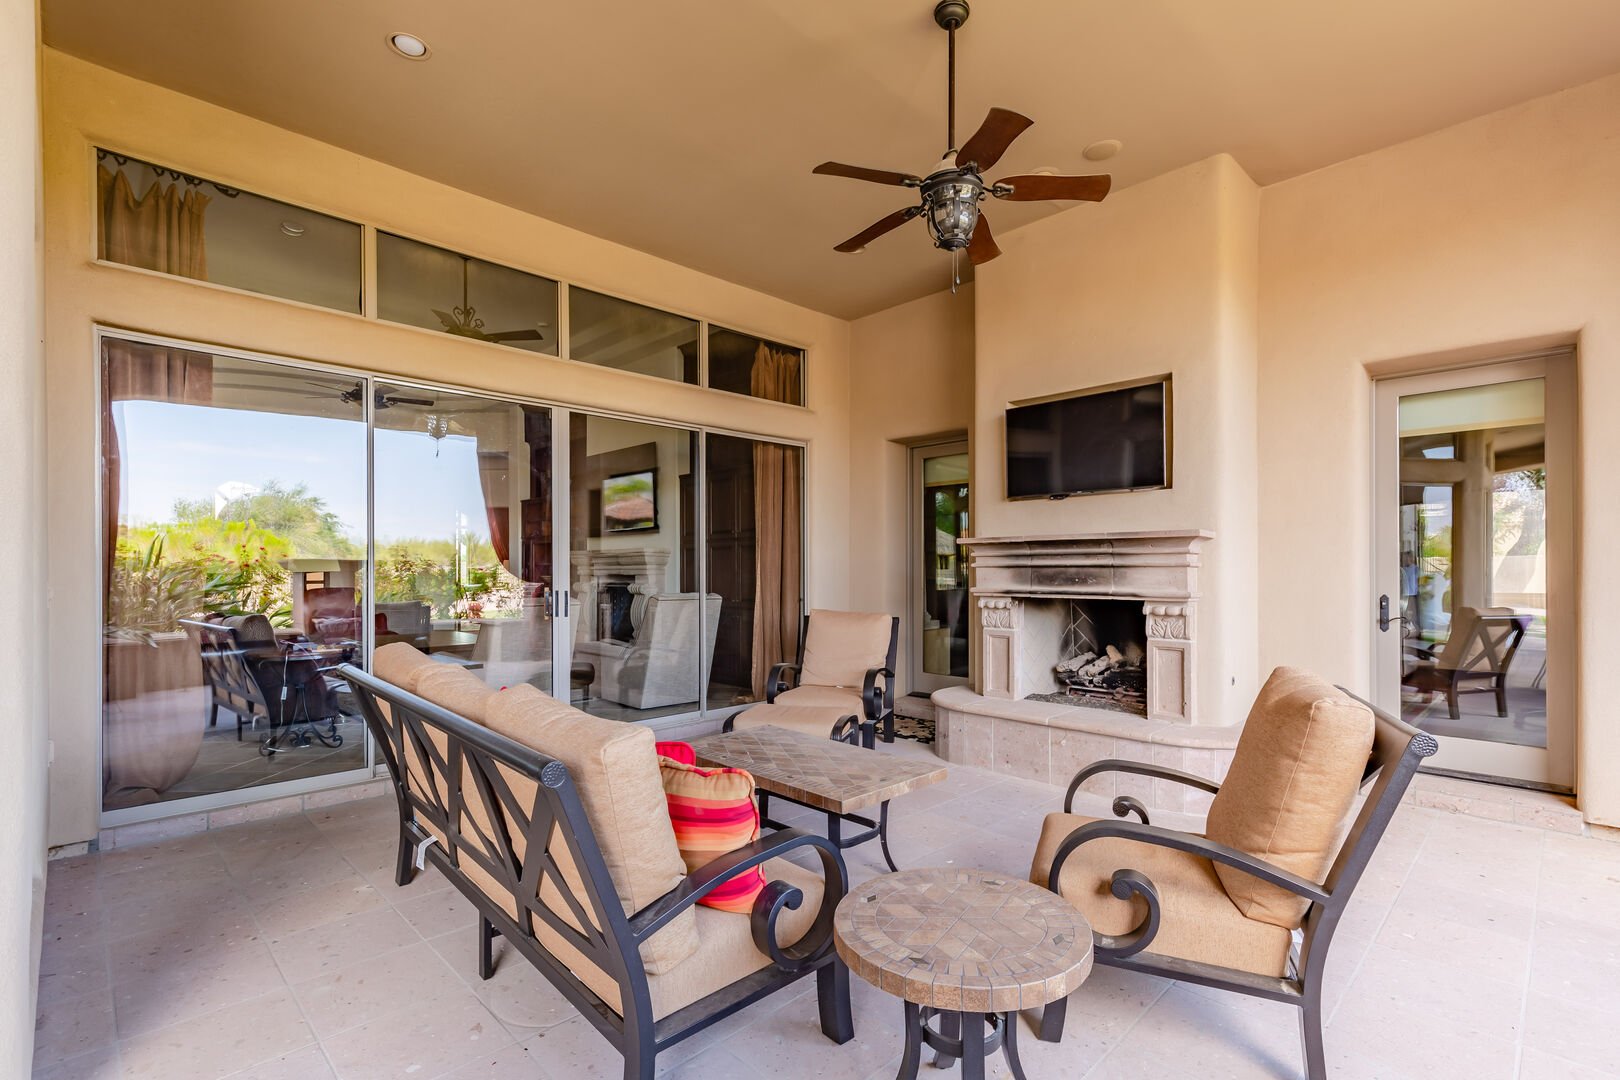 Backyard covered patio featuring an outdoor fireplace accompanied by a Smart TV and outdoor furnishings for relaxing.